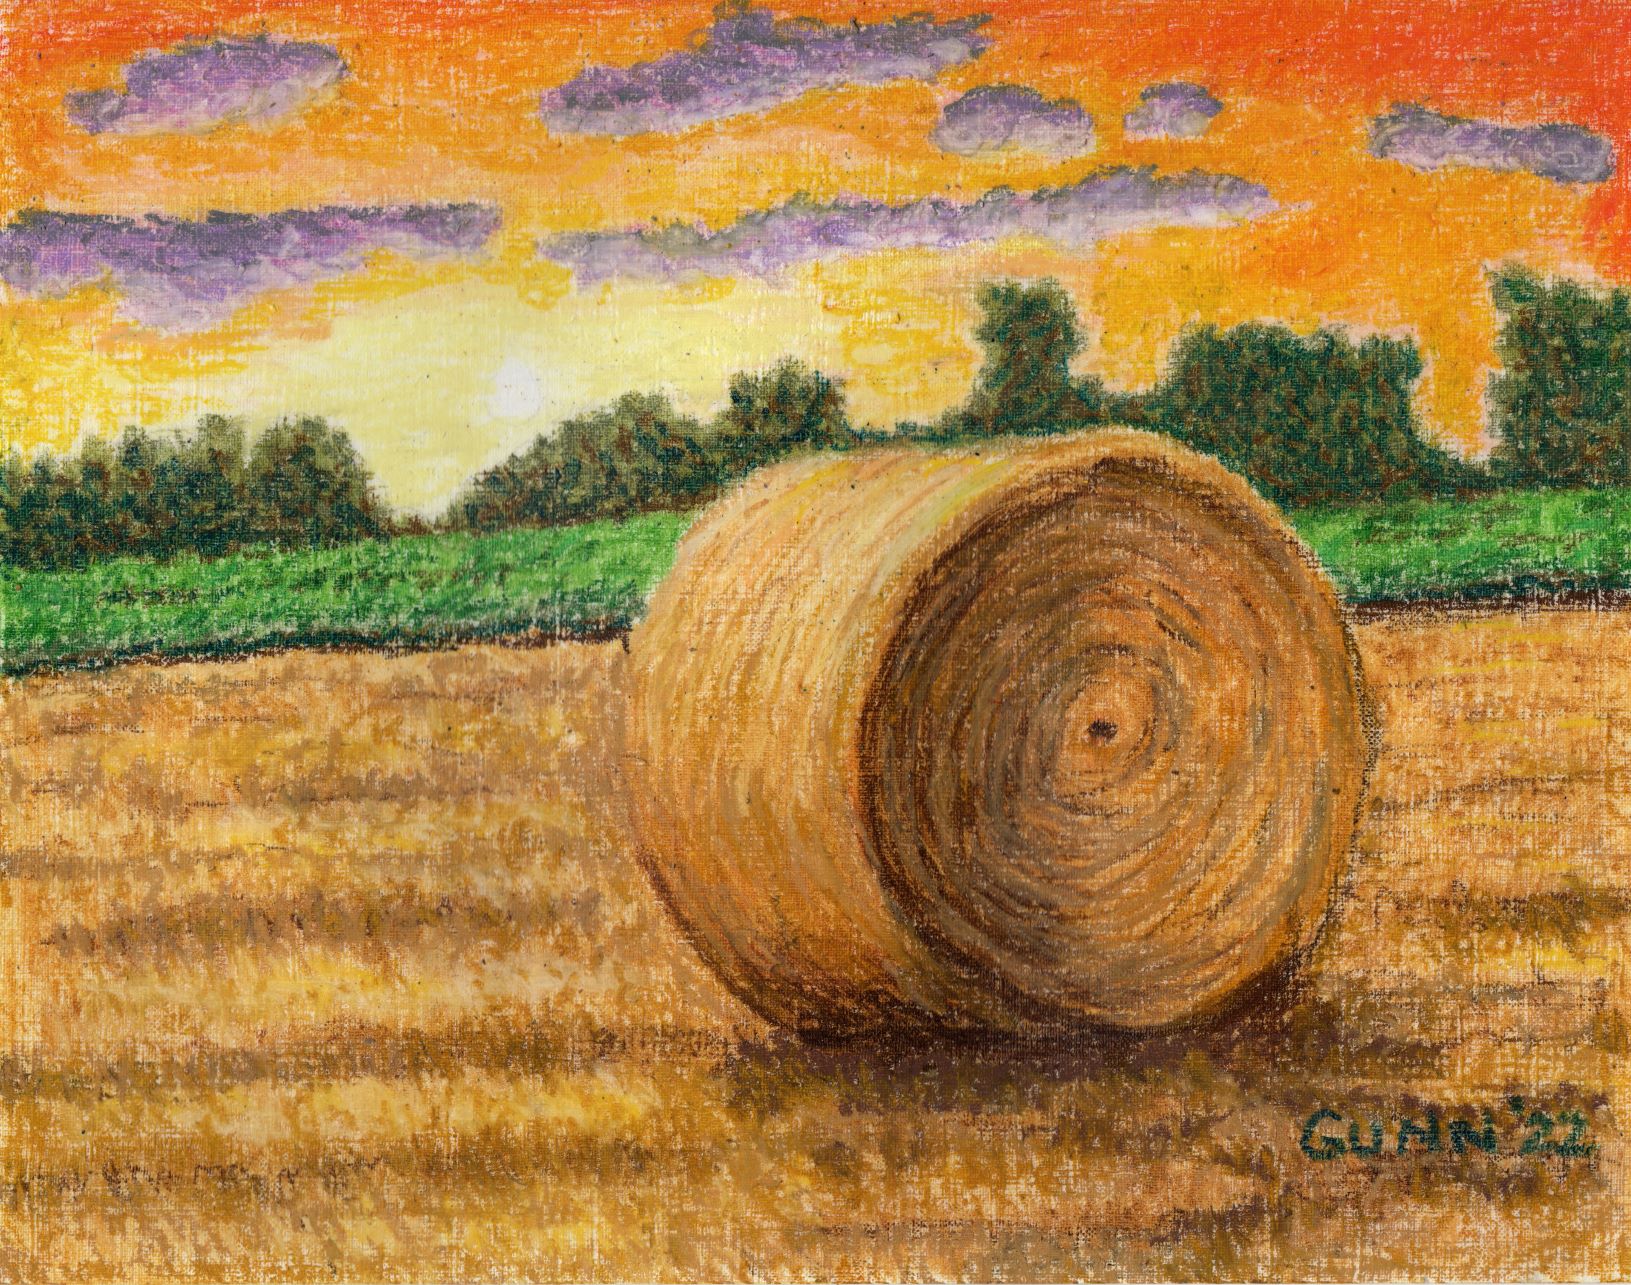 Sunset Over the Hayfield, 11 x 14 inch landscape in oil pastel